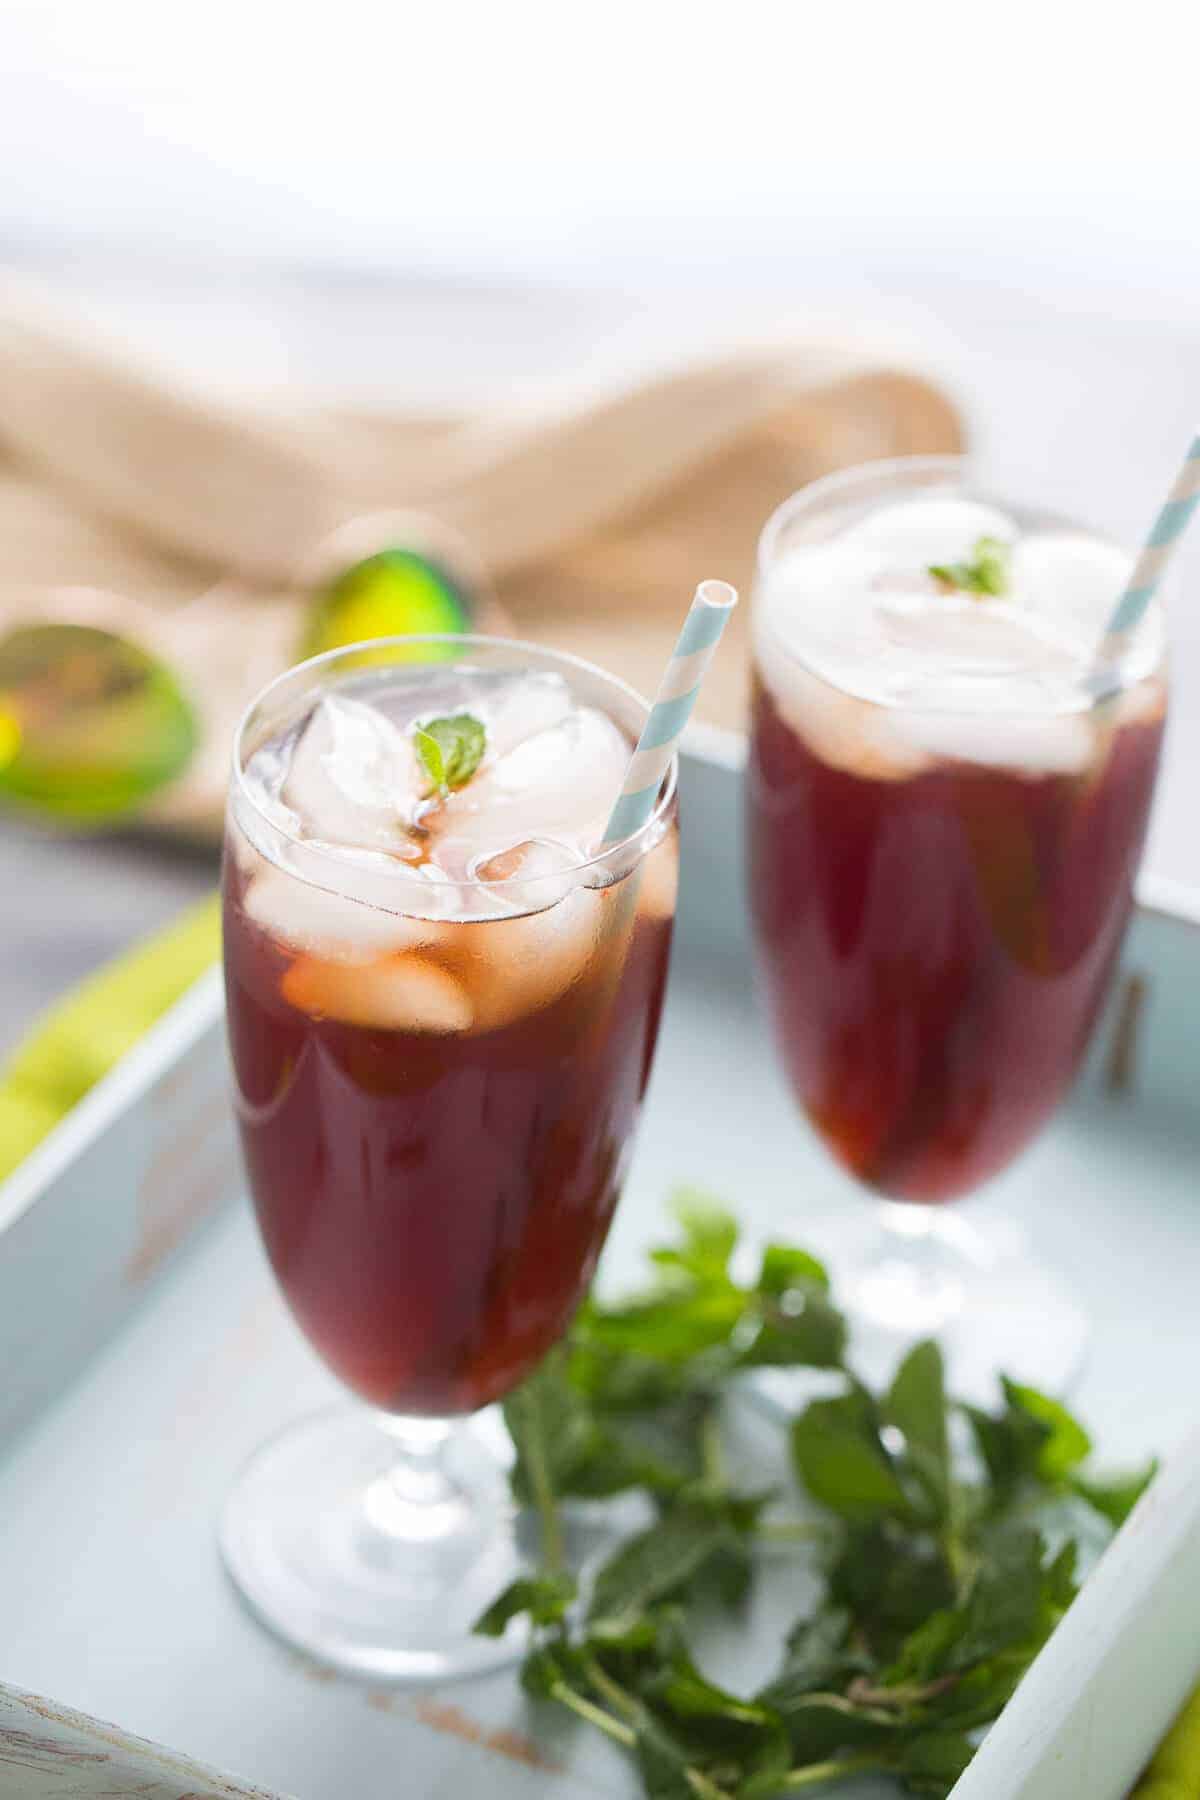 This pomegranate green tea is the perfect refresher for those hot summer days!